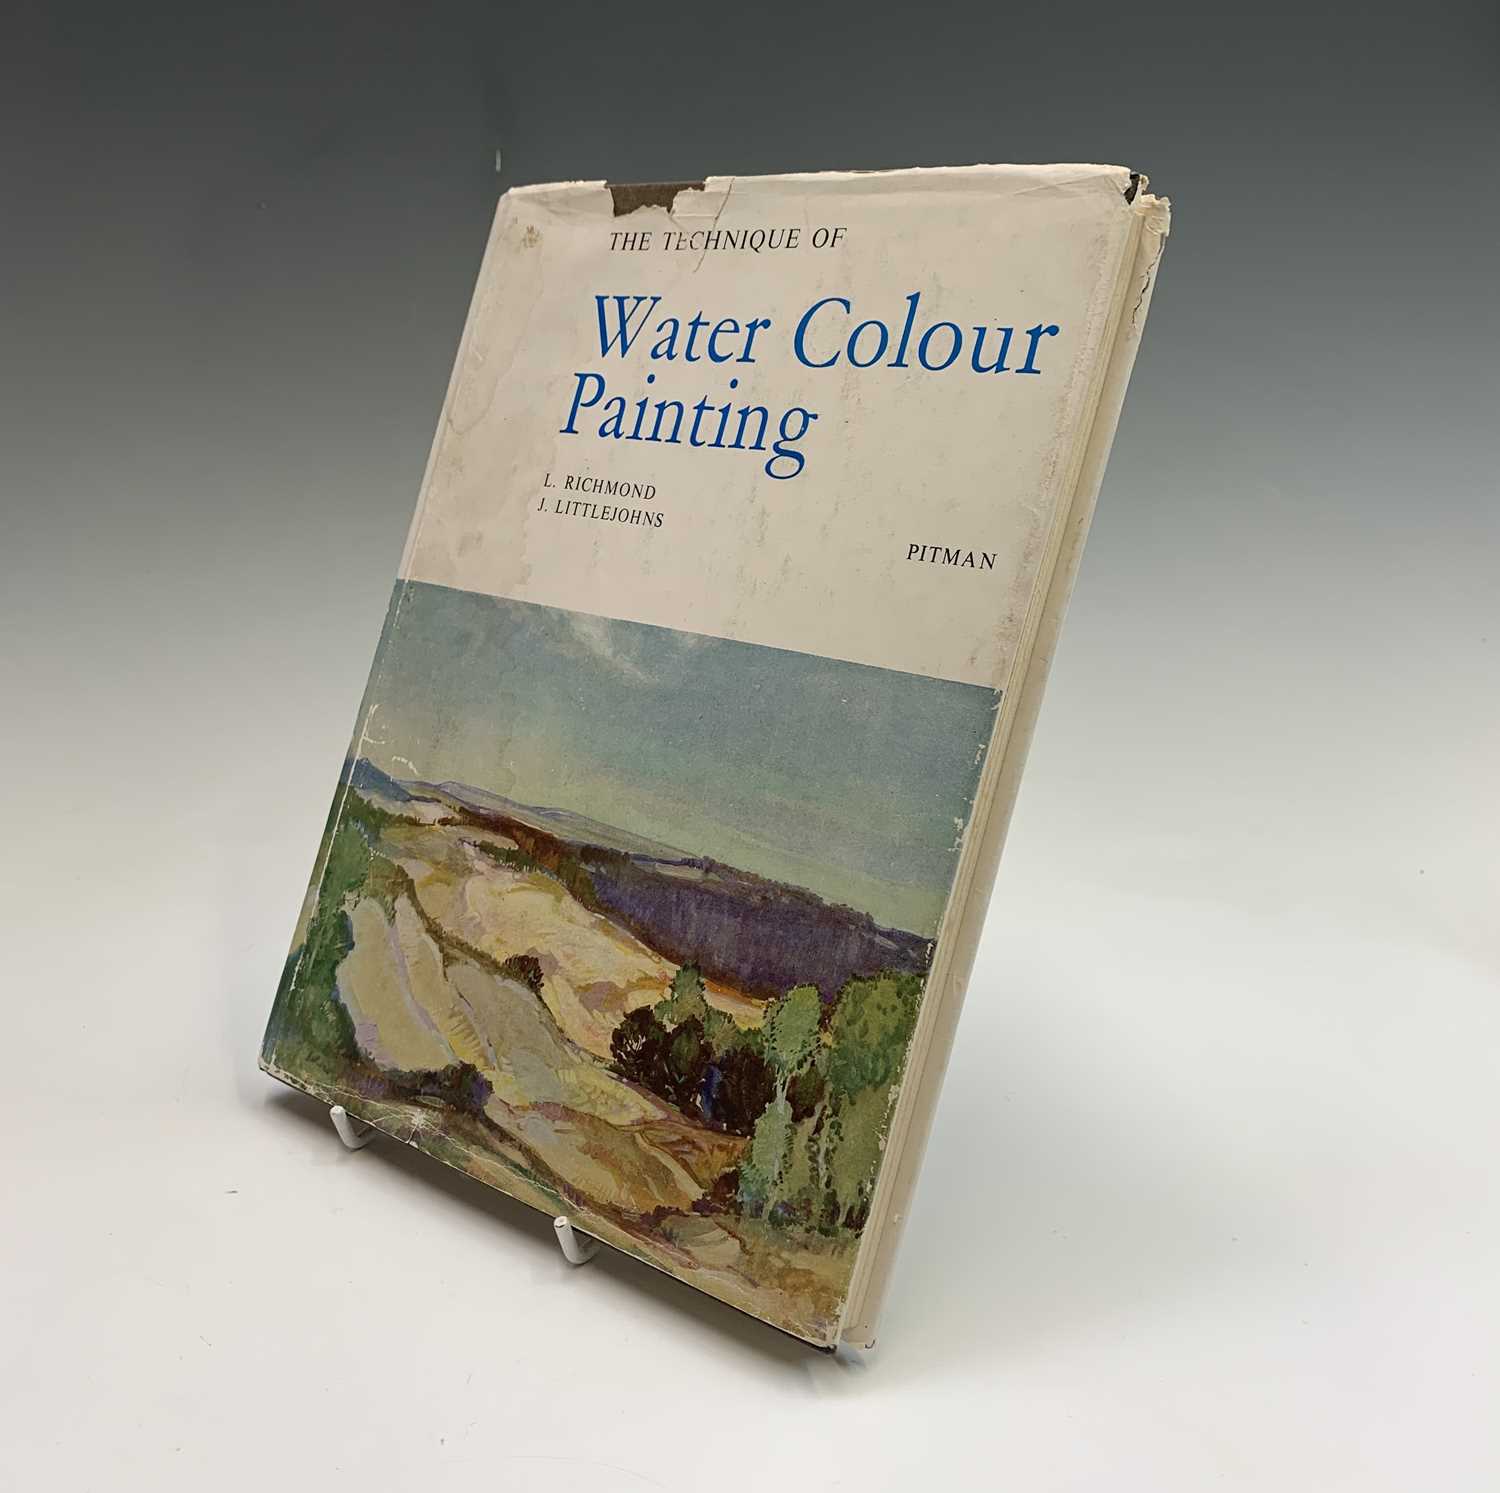 Two Leonard Richmond books'The Technique of Watercolour Painting' and 'The Technique of Oil